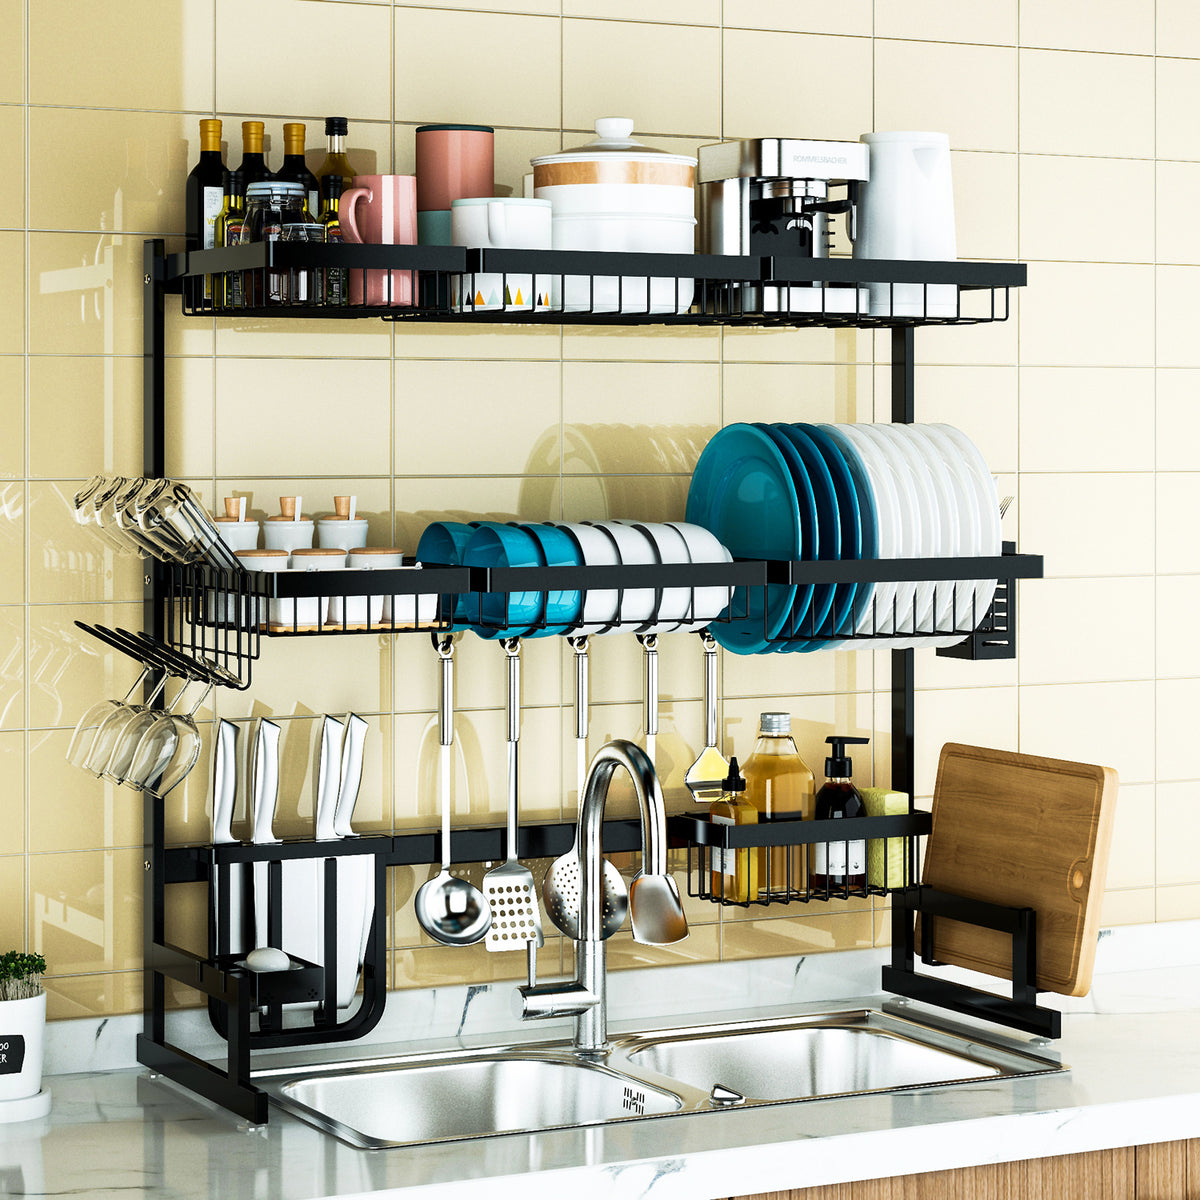 PUSDON Over Sink Dish Drying Rack (34-45) 3 Tier, 2 Cutlery